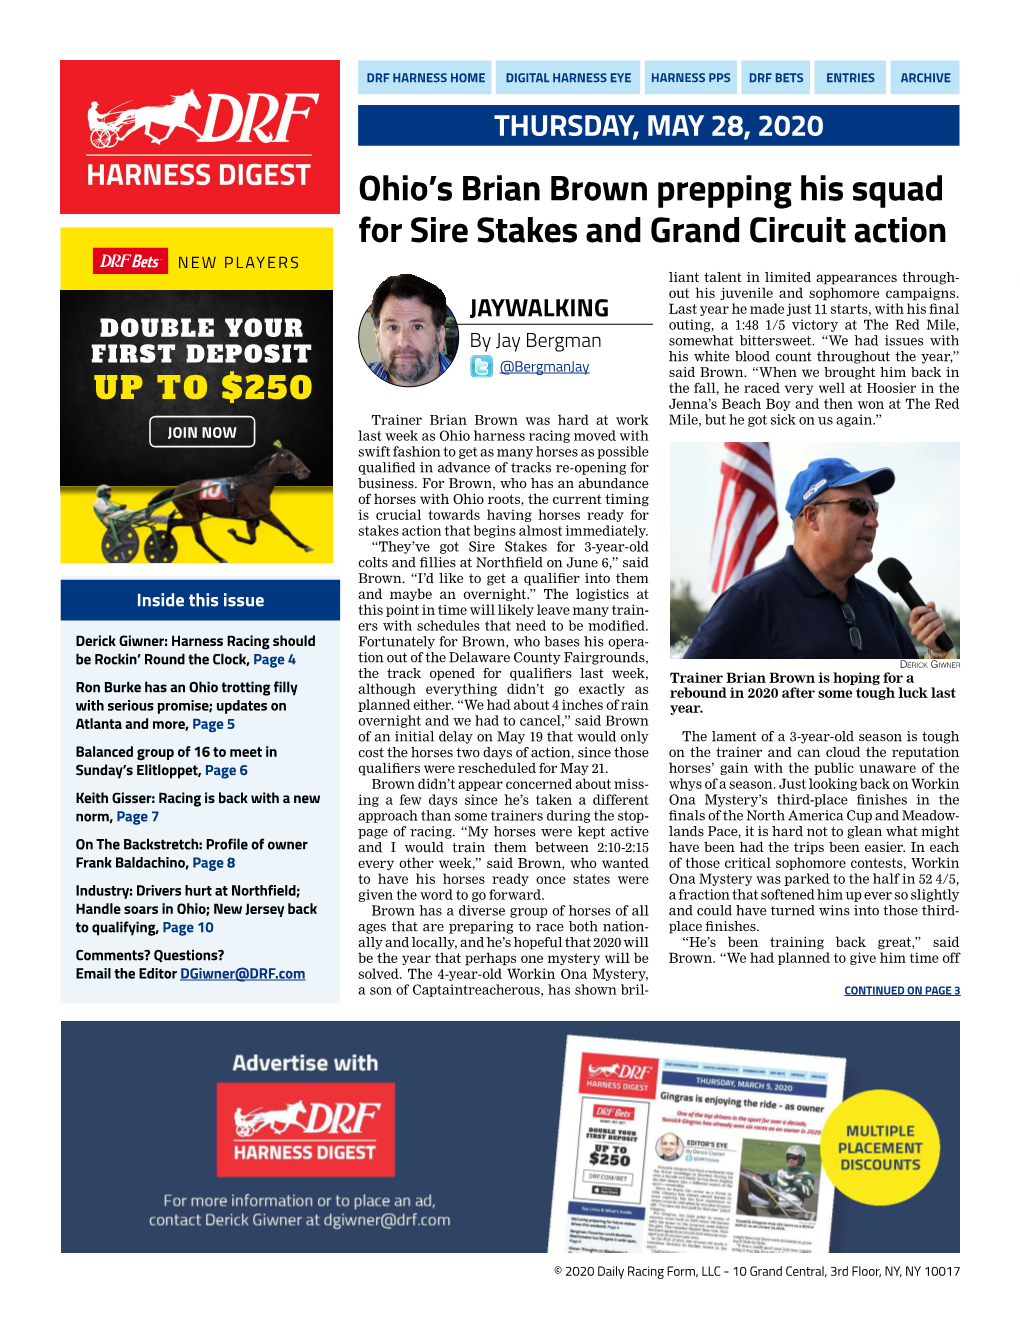 Ohio's Brian Brown Prepping His Squad for Sire Stakes and Grand